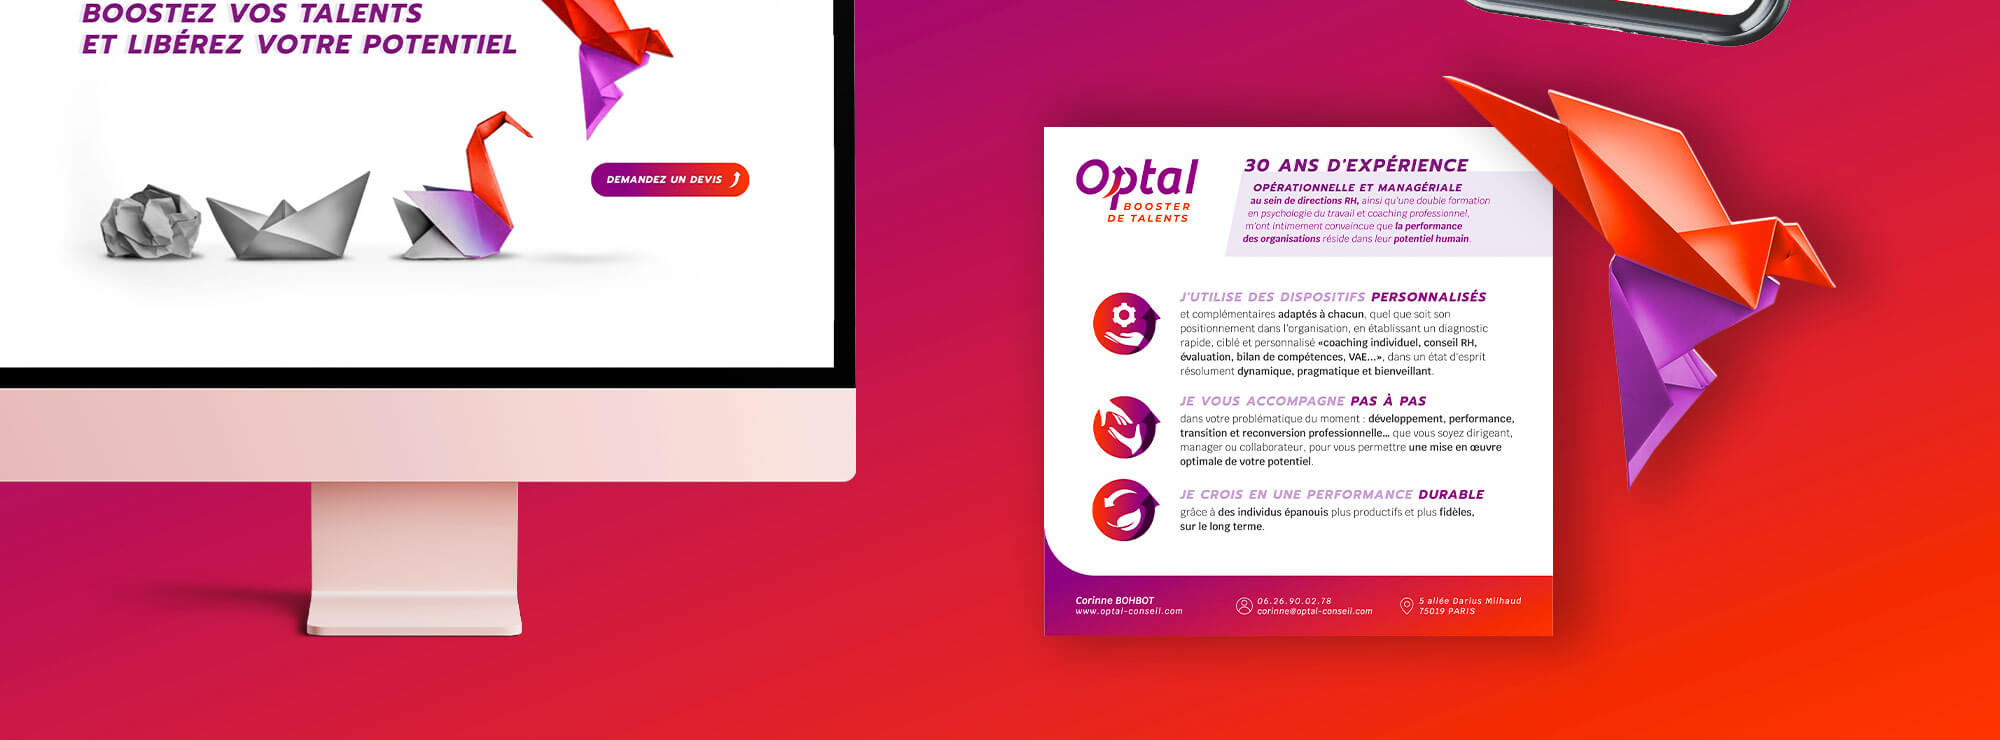 Optal - an identity with potential